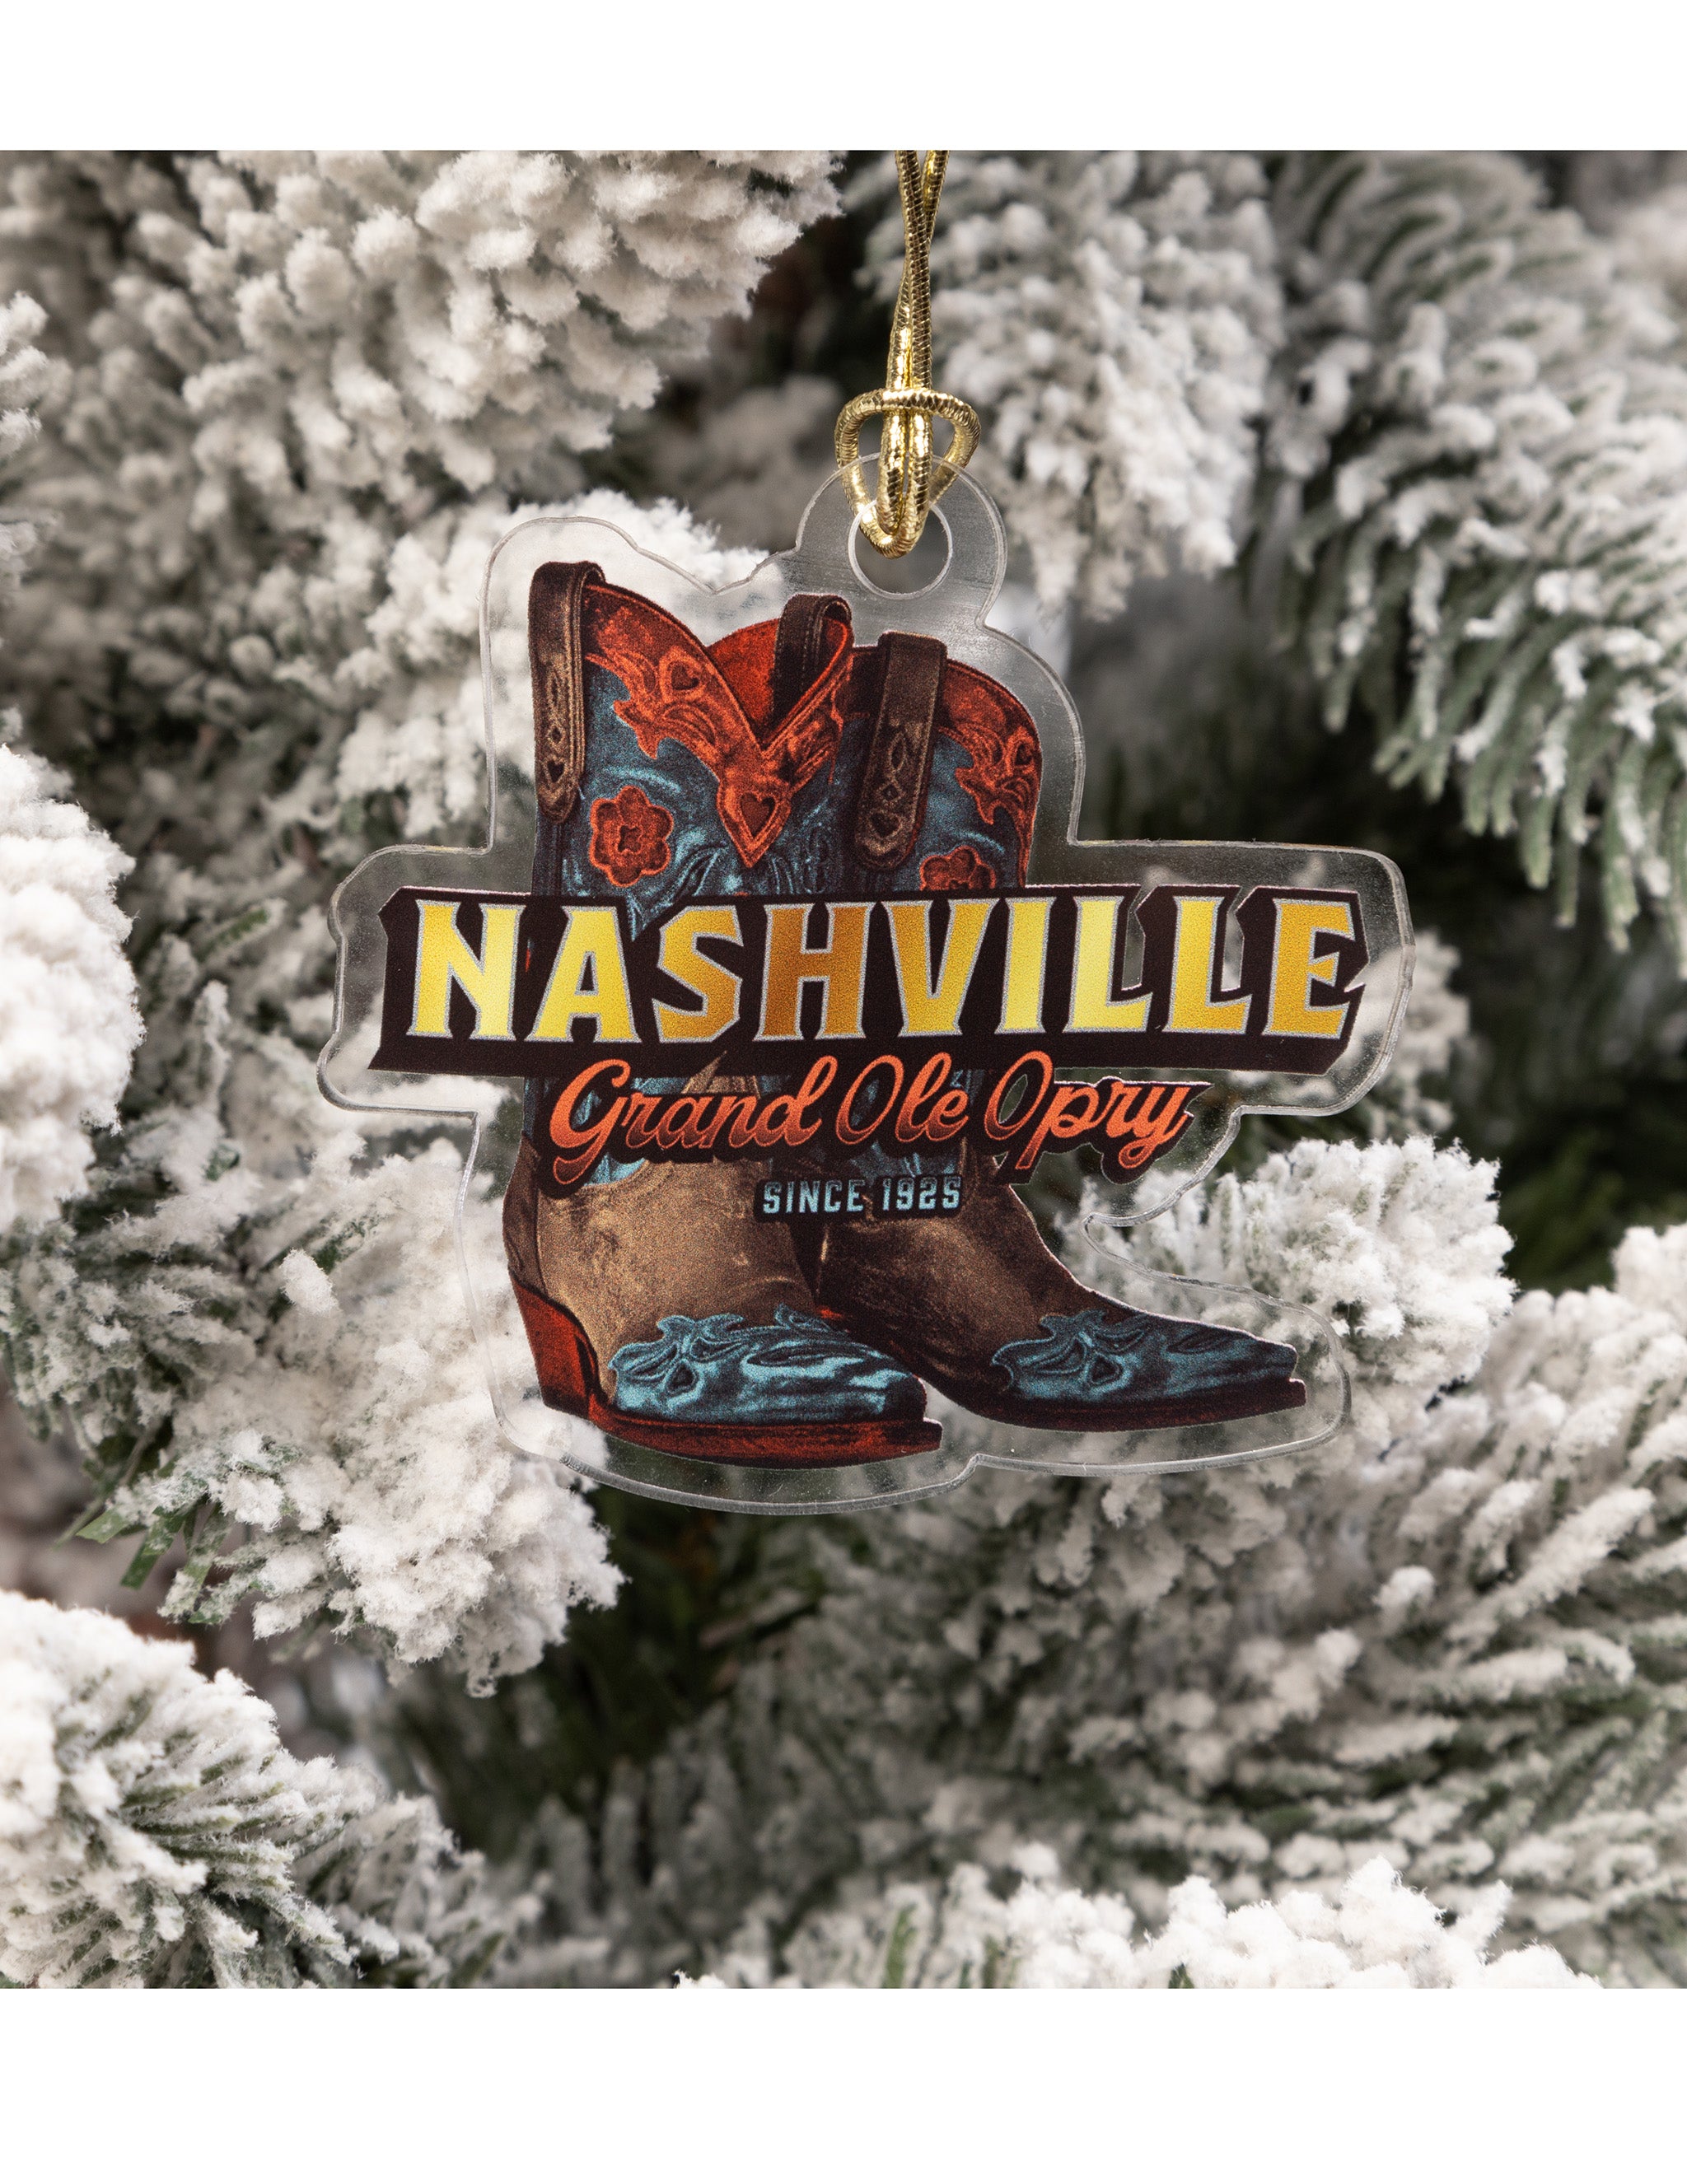 Opry Nashville Two Boots Ornament